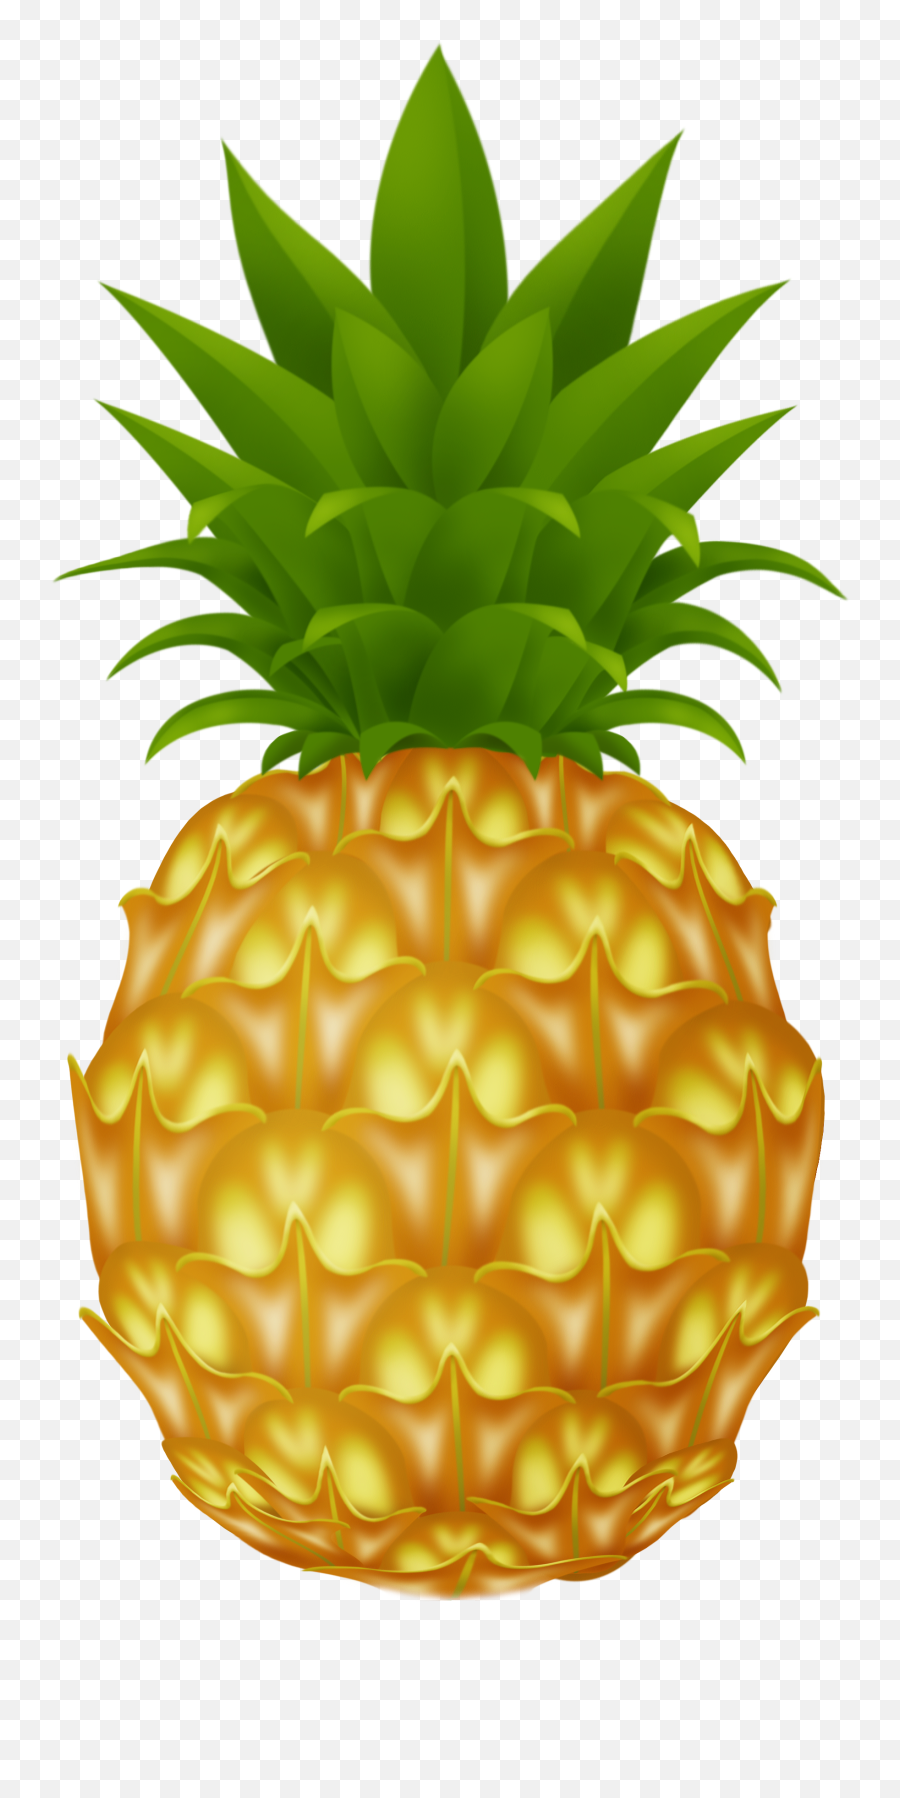 Pineapple Pictures Fruits - Pineapple Clipart Png,Pineapple Clipart Png